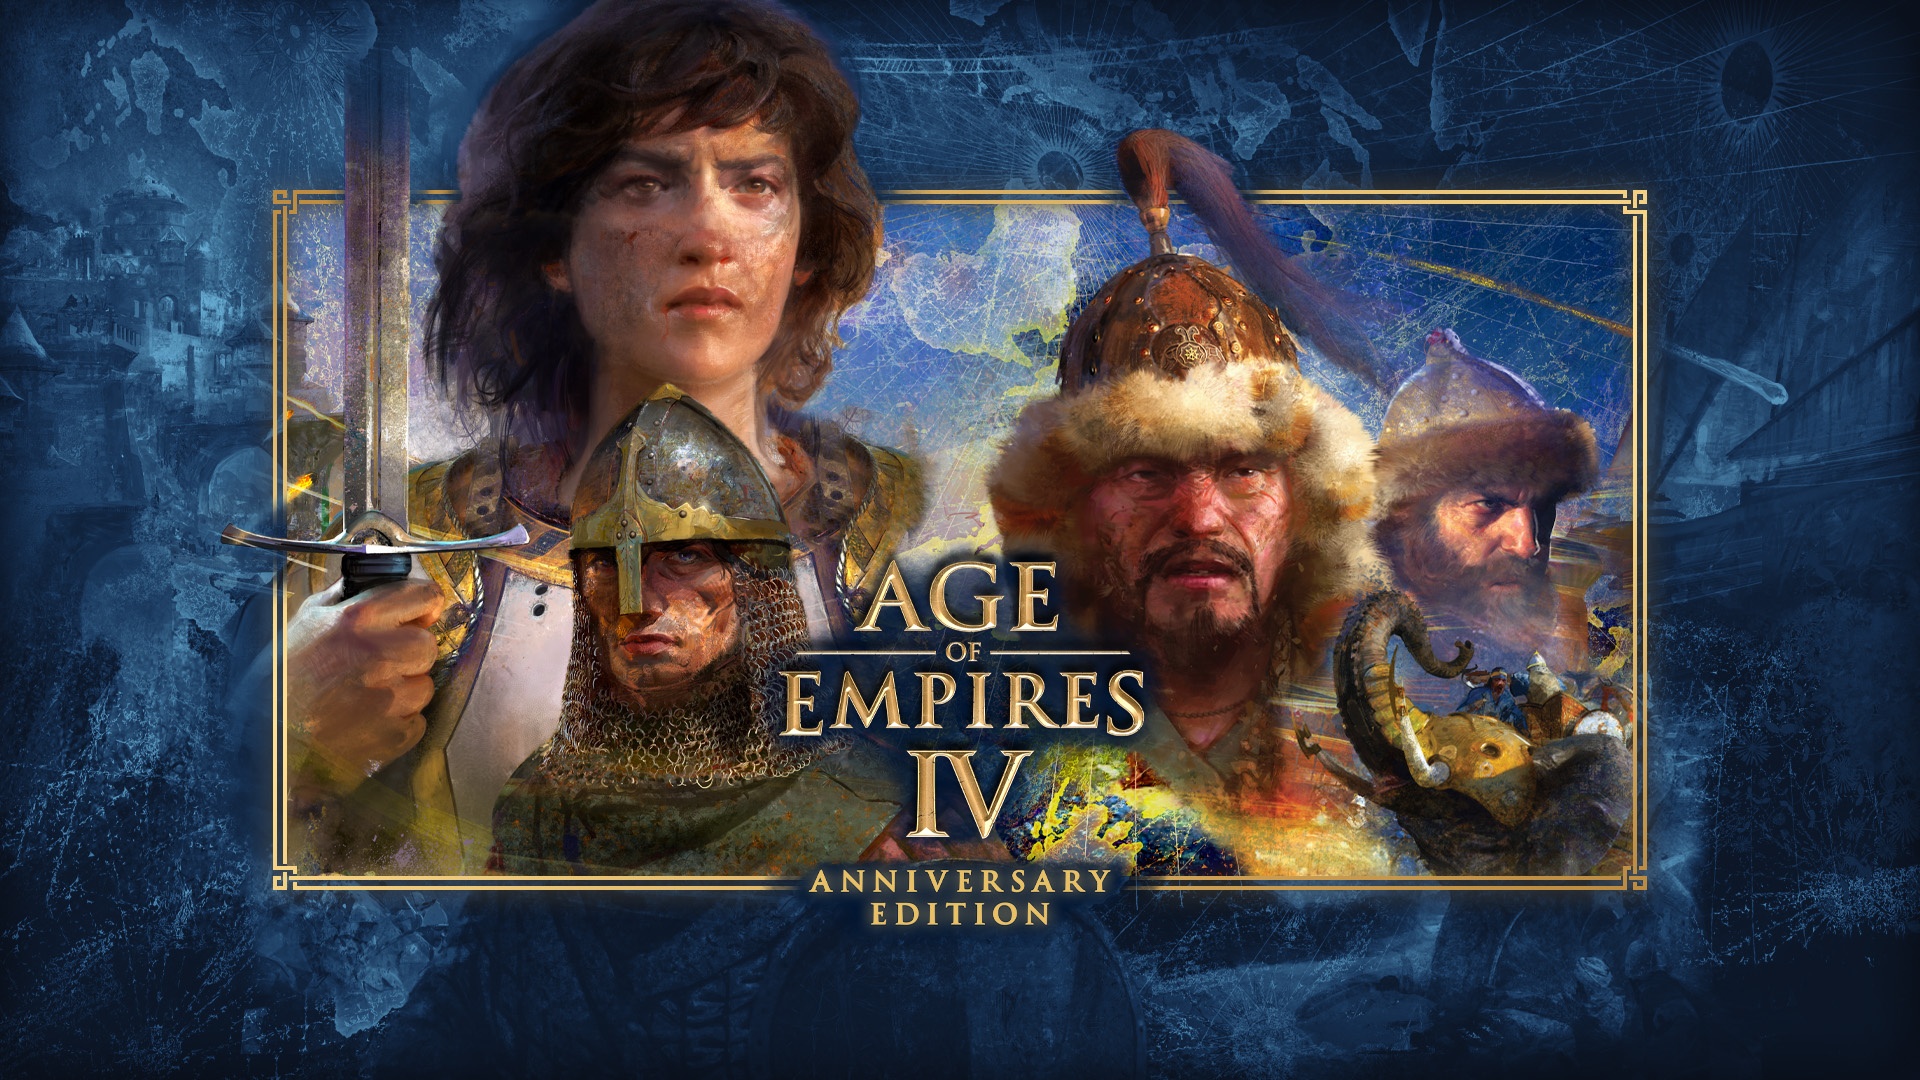 Celebrating 25 Years of Age of Empires: Anniversary Broadcast and Age of Empires IV Anniversary Edition